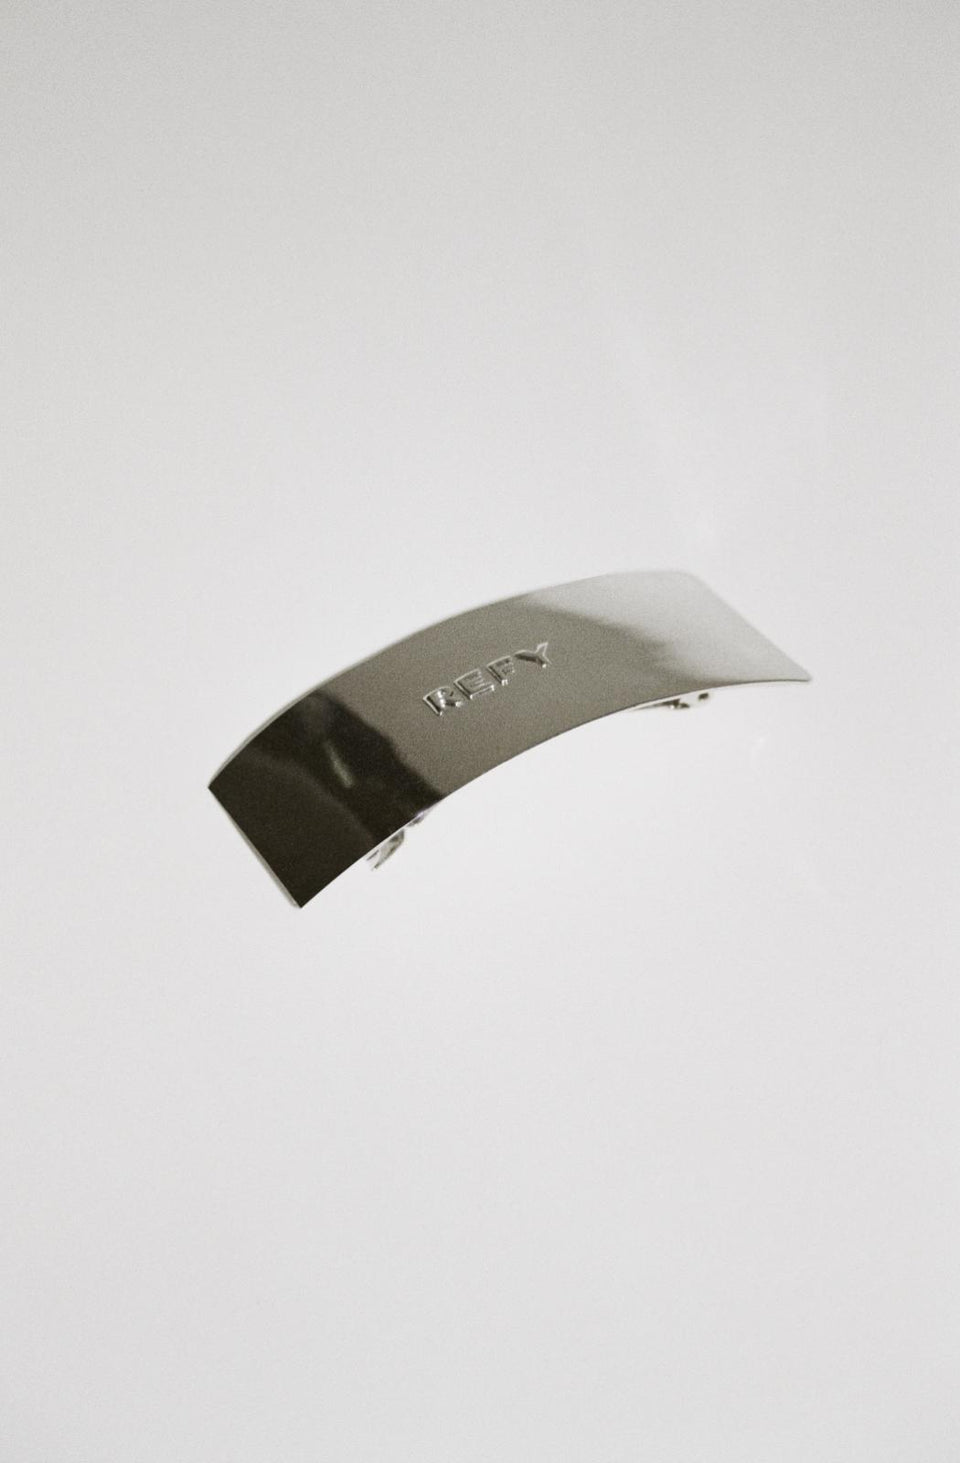 FRONT IMAGE OF REFY METAL RECTANGLE HAIR CLIP WITH EMBOSSED LOGO